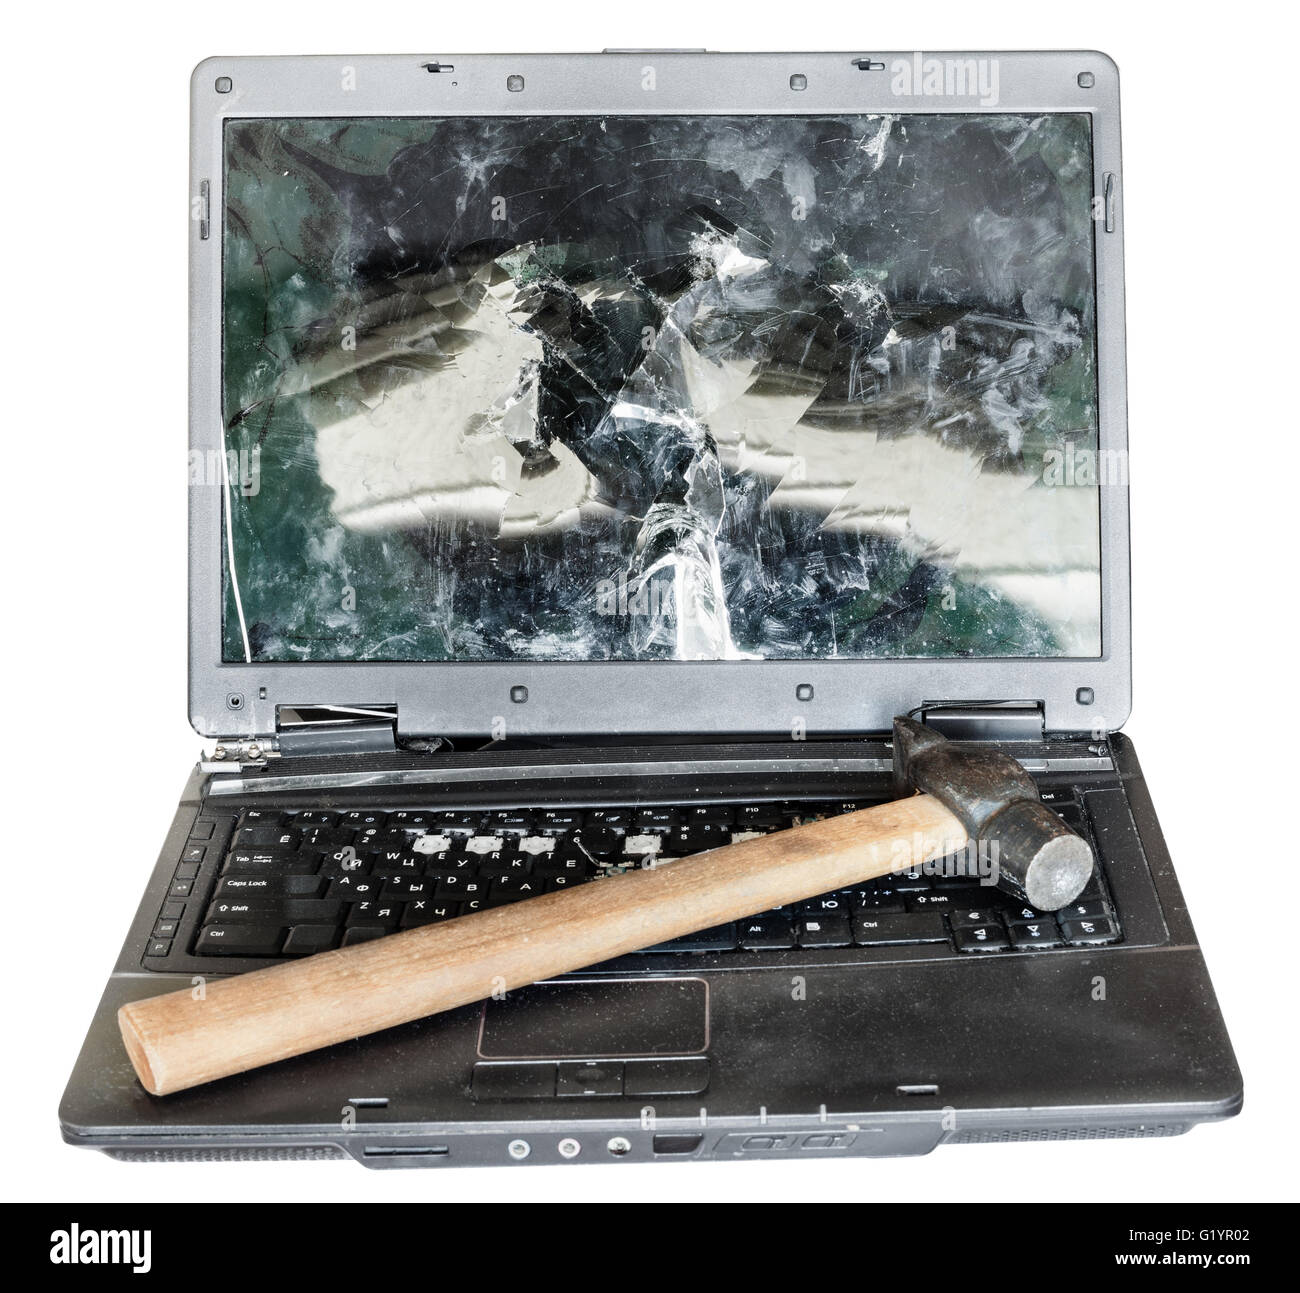 direct view of old broken laptop with hammer on keyboard isolated on white background Stock Photo